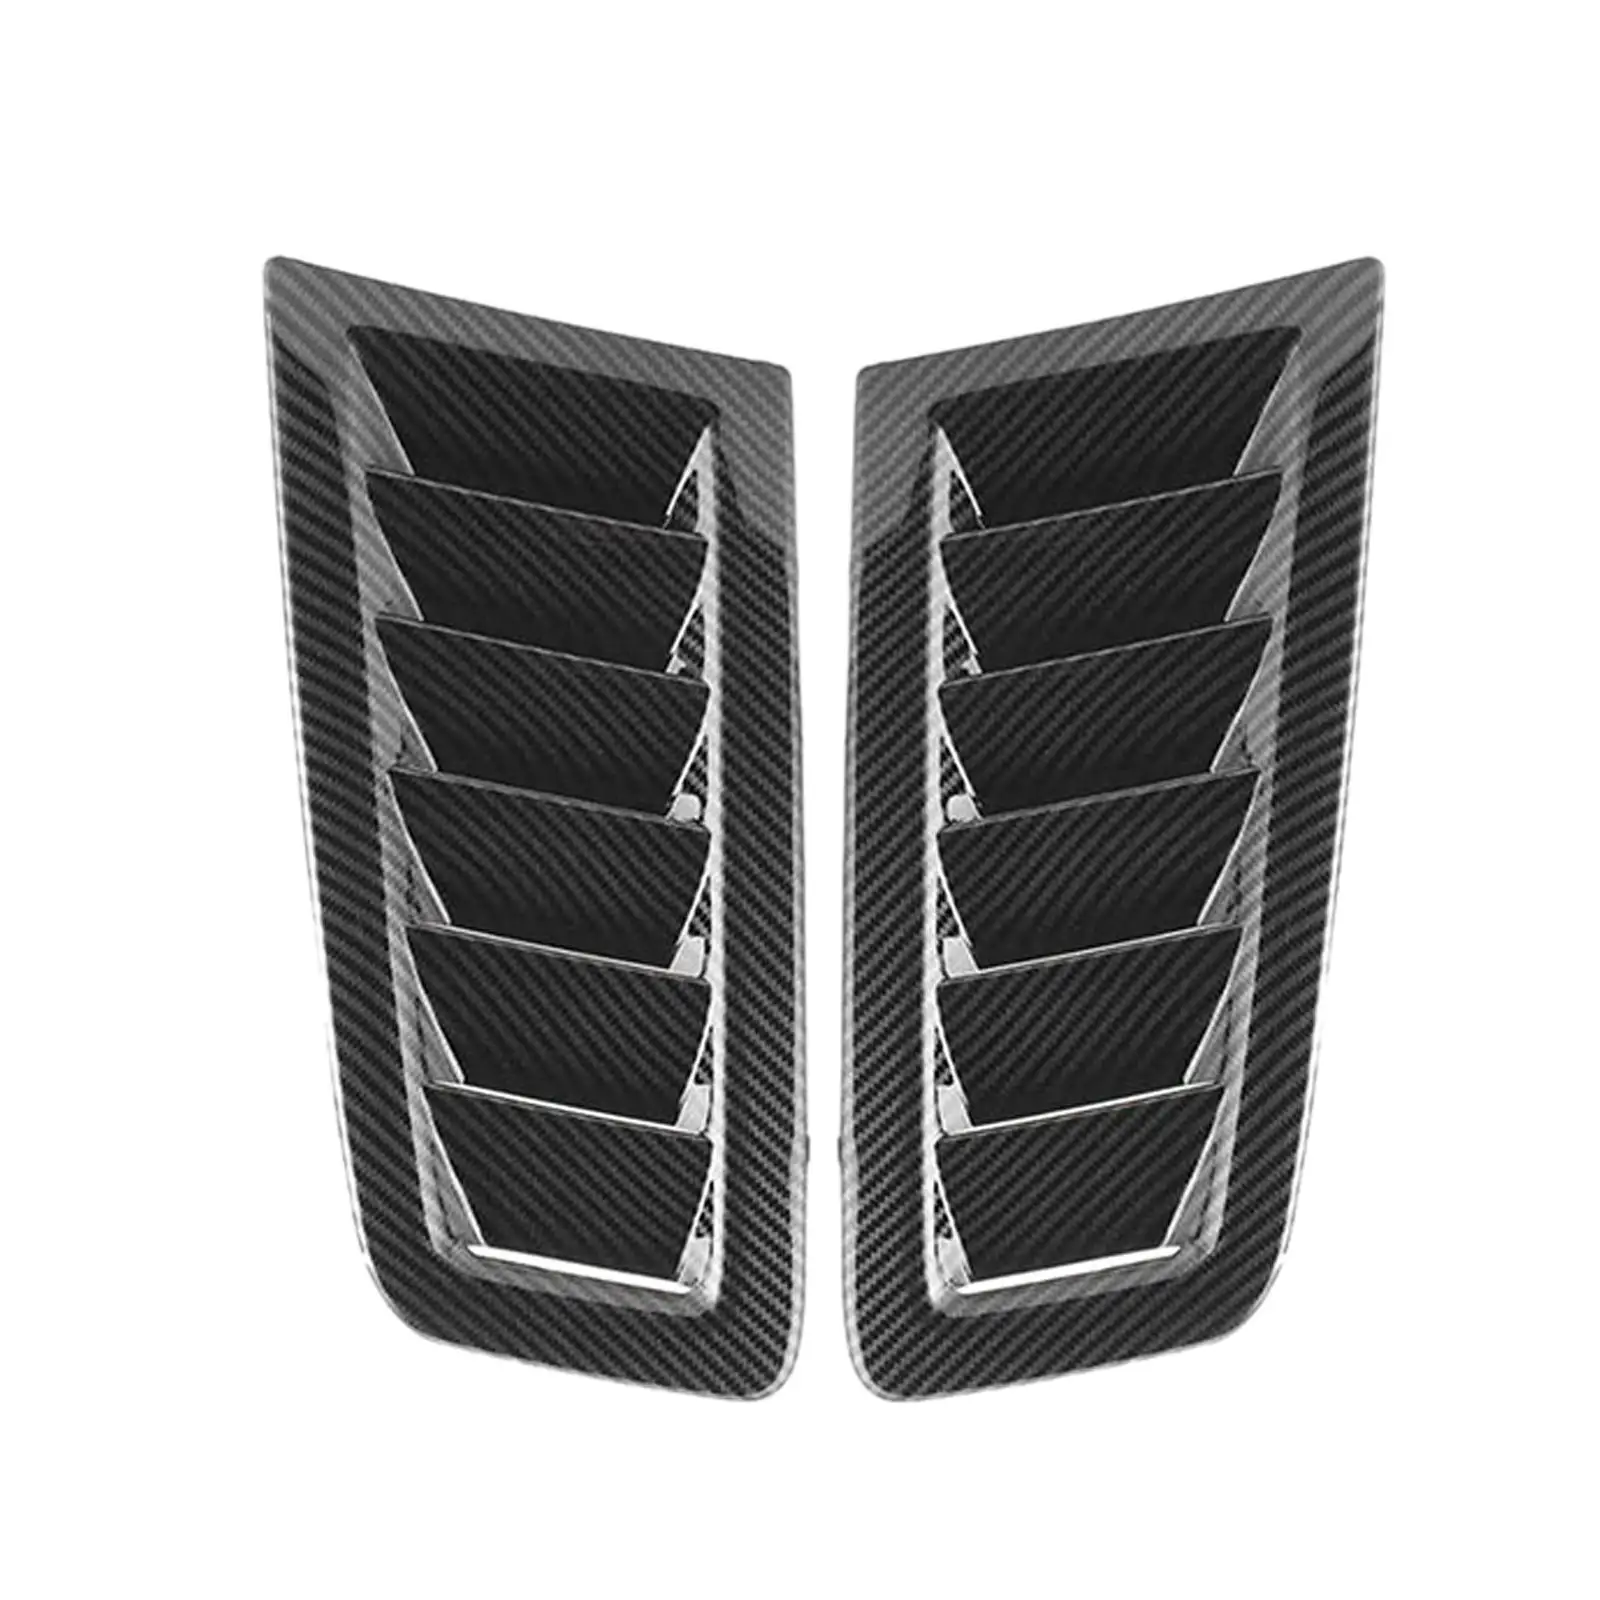 2 Pieces Car Hood Vent Scoops Replacement, Air Intake Hood Vents Bonnet Cover